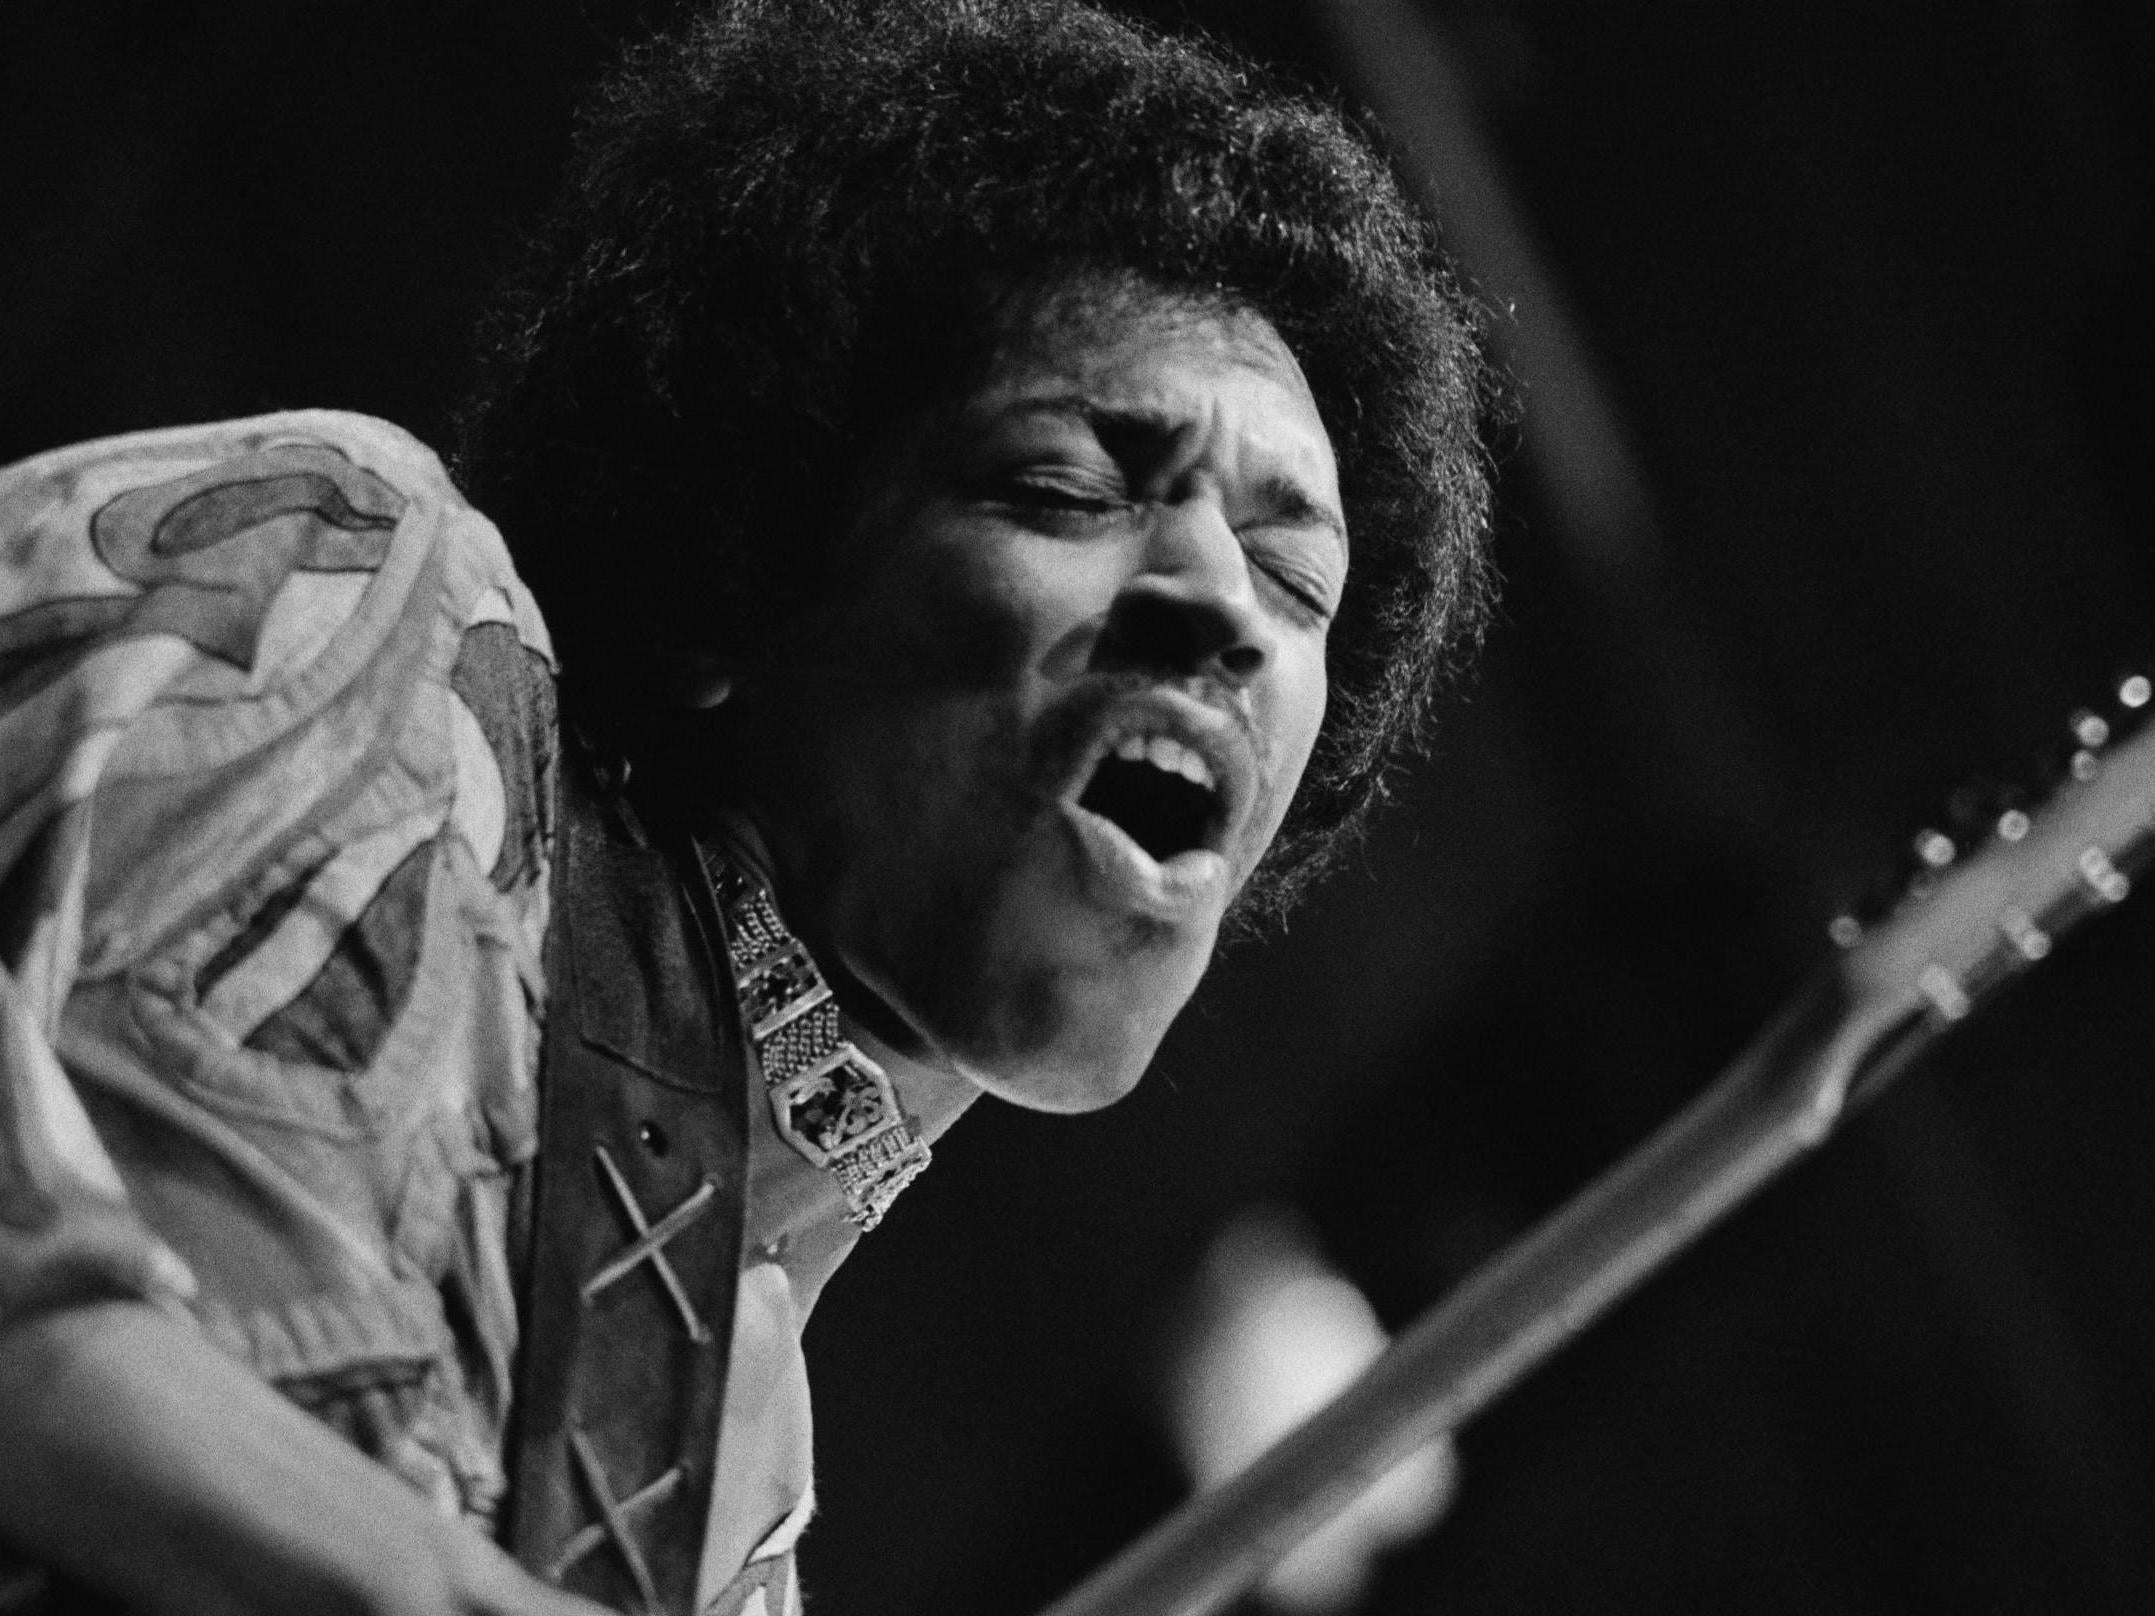 When Jimi Hendrix came to London, he changed the sound of music for ever, Jimi  Hendrix